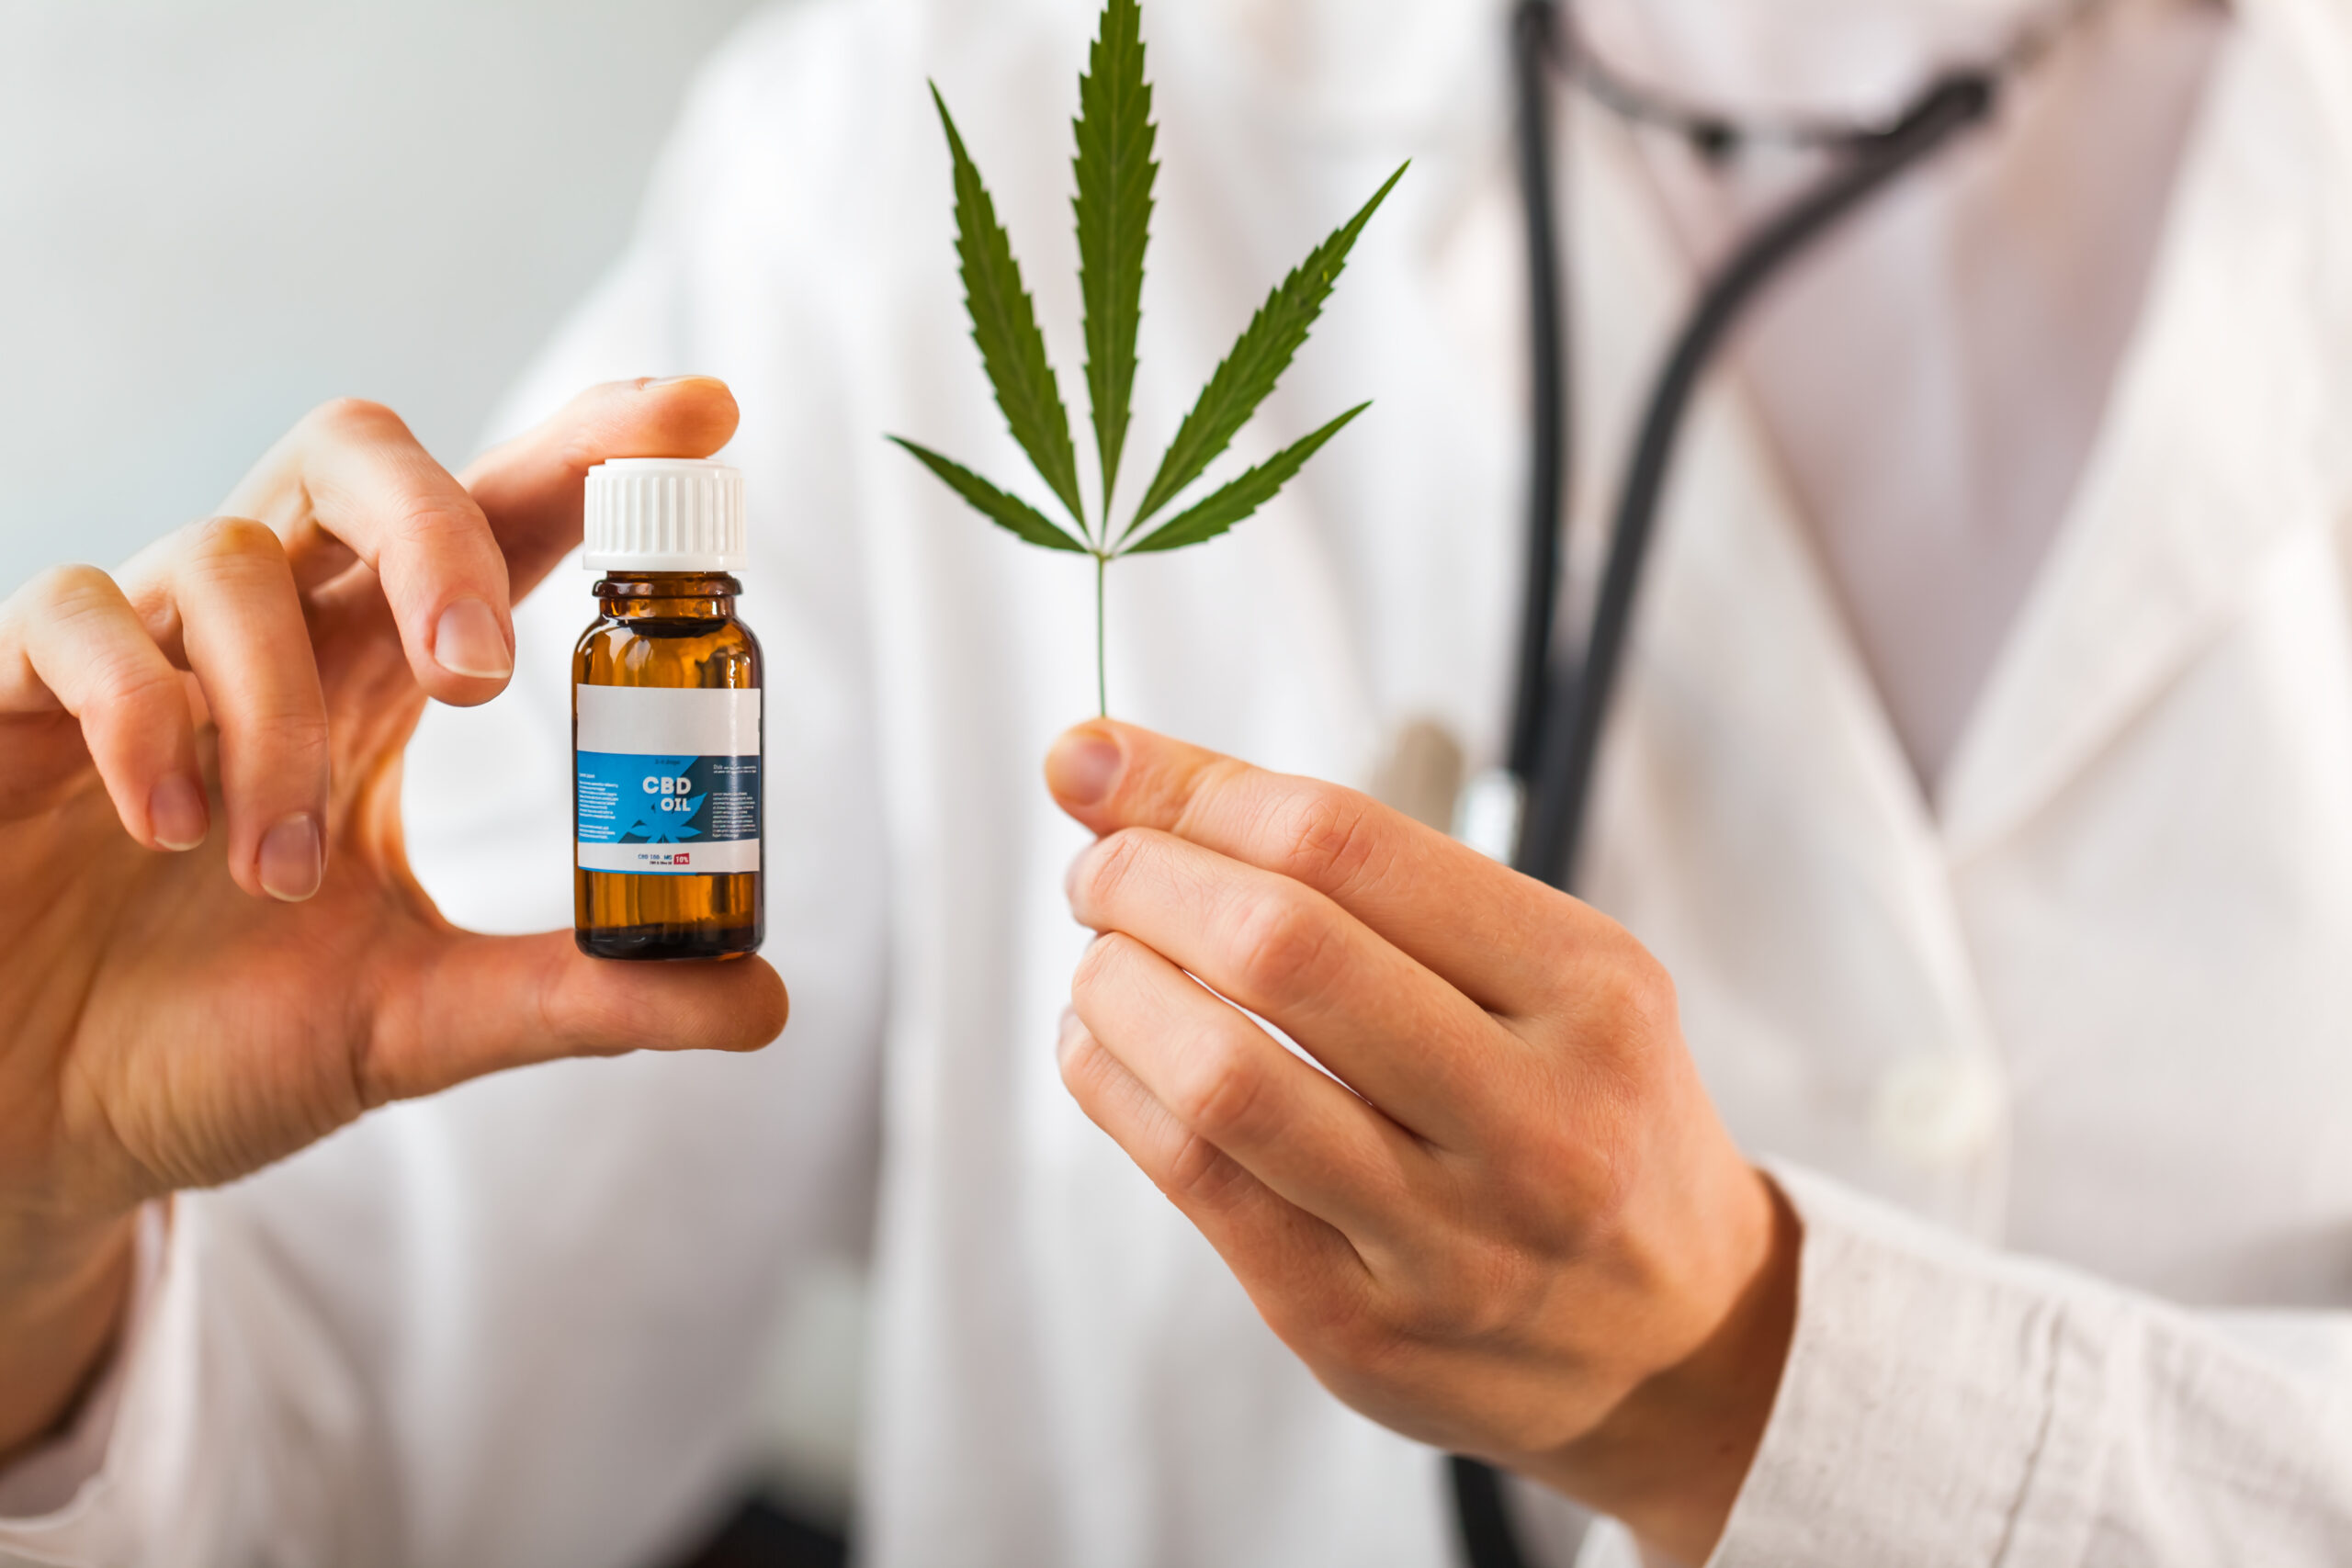 How to Decide If Cannabis Belongs In Your Cancer Treatment Program